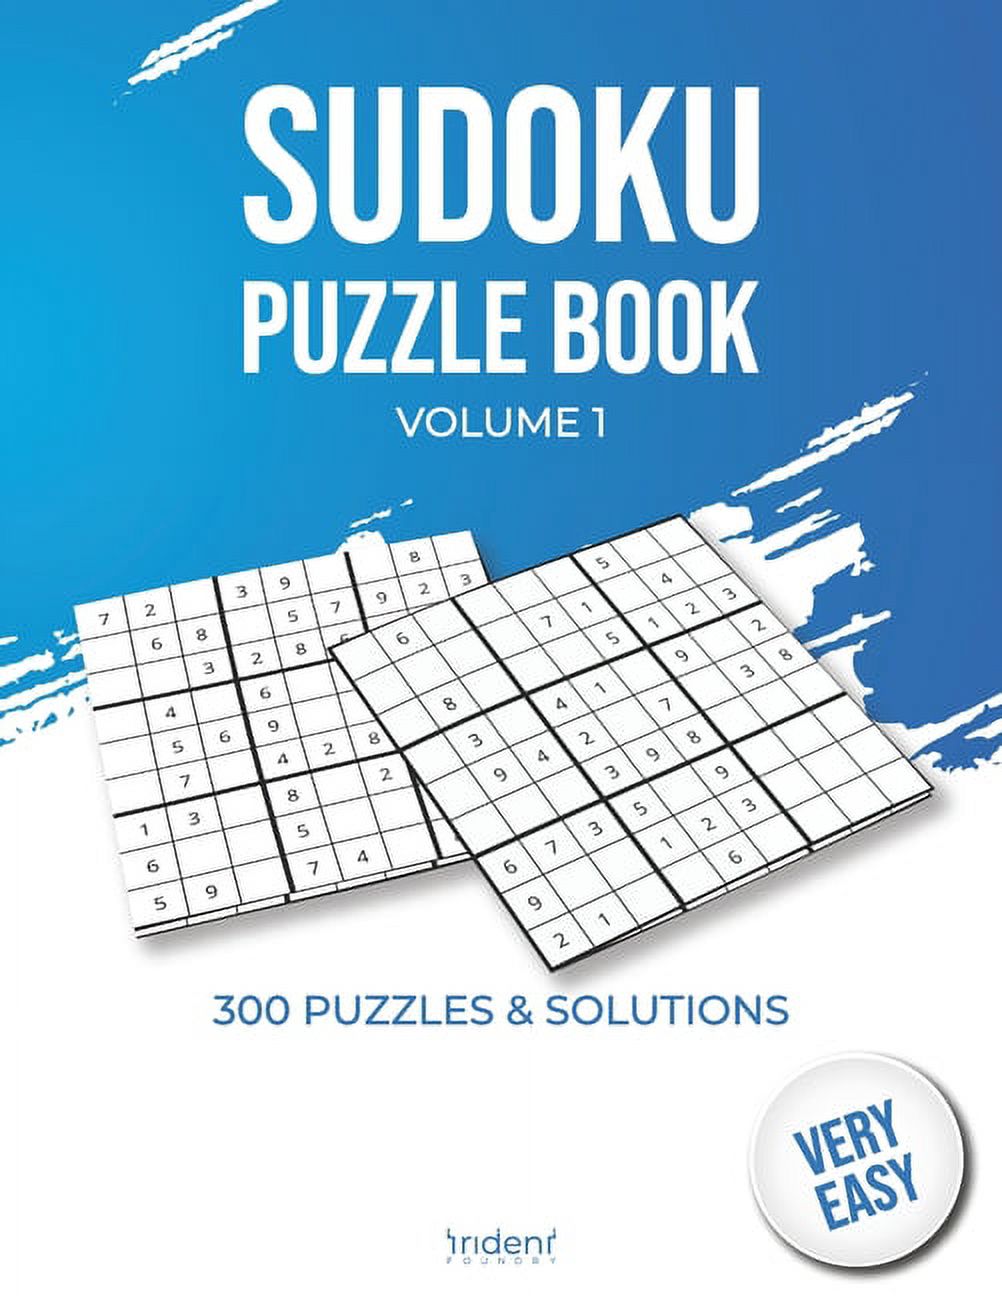 Activity Books for Adults: Sudoku puzzle book - very easy volume 1: 300 puzzles and solutions for beginners - sudoku puzzle book for adults (Paperback) - image 1 of 1